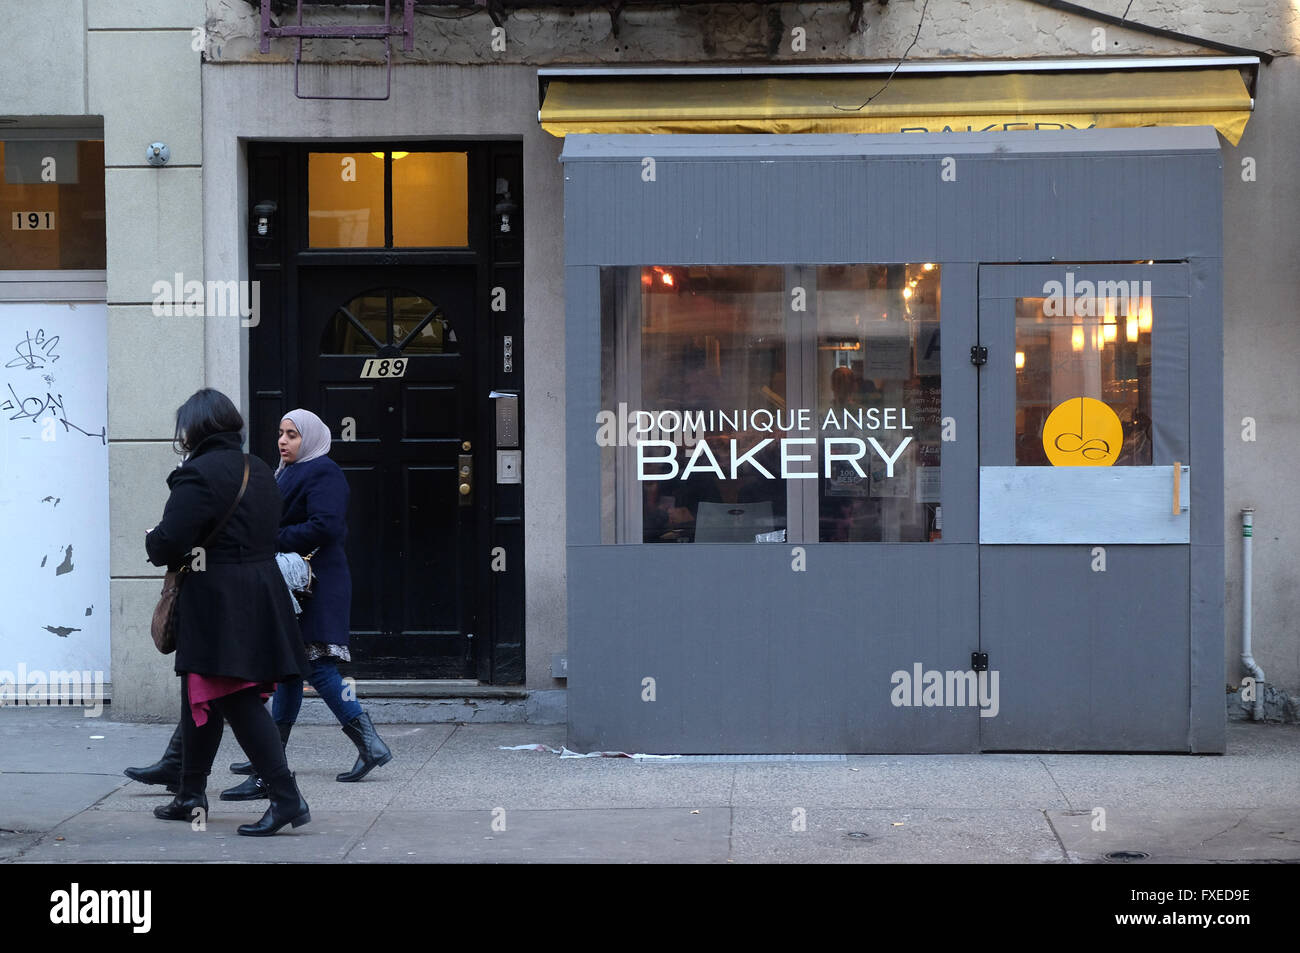 The Dominique Ansel Bakery famous for the Cronut, a donut and croissant hybrid in New York City, USA. Stock Photo